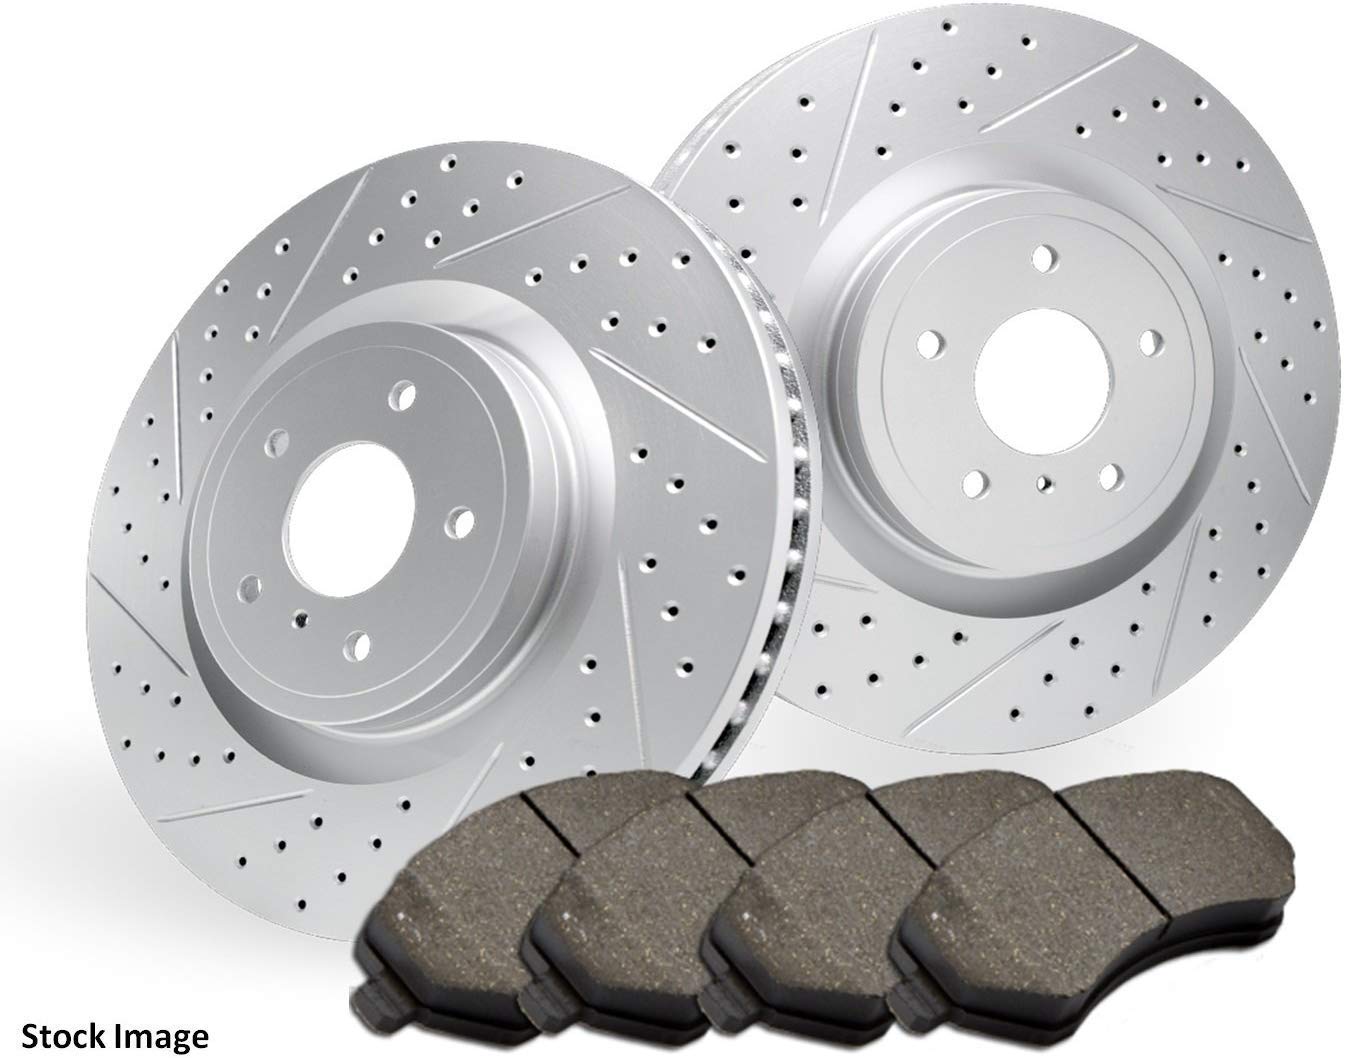 2017 for Kia Sportage Rear Premium Quality Cross Drilled and Slotted Coated Disc Brake Rotors And Ceramic Brake Pads - (For Both Left and Right) One Year Warranty